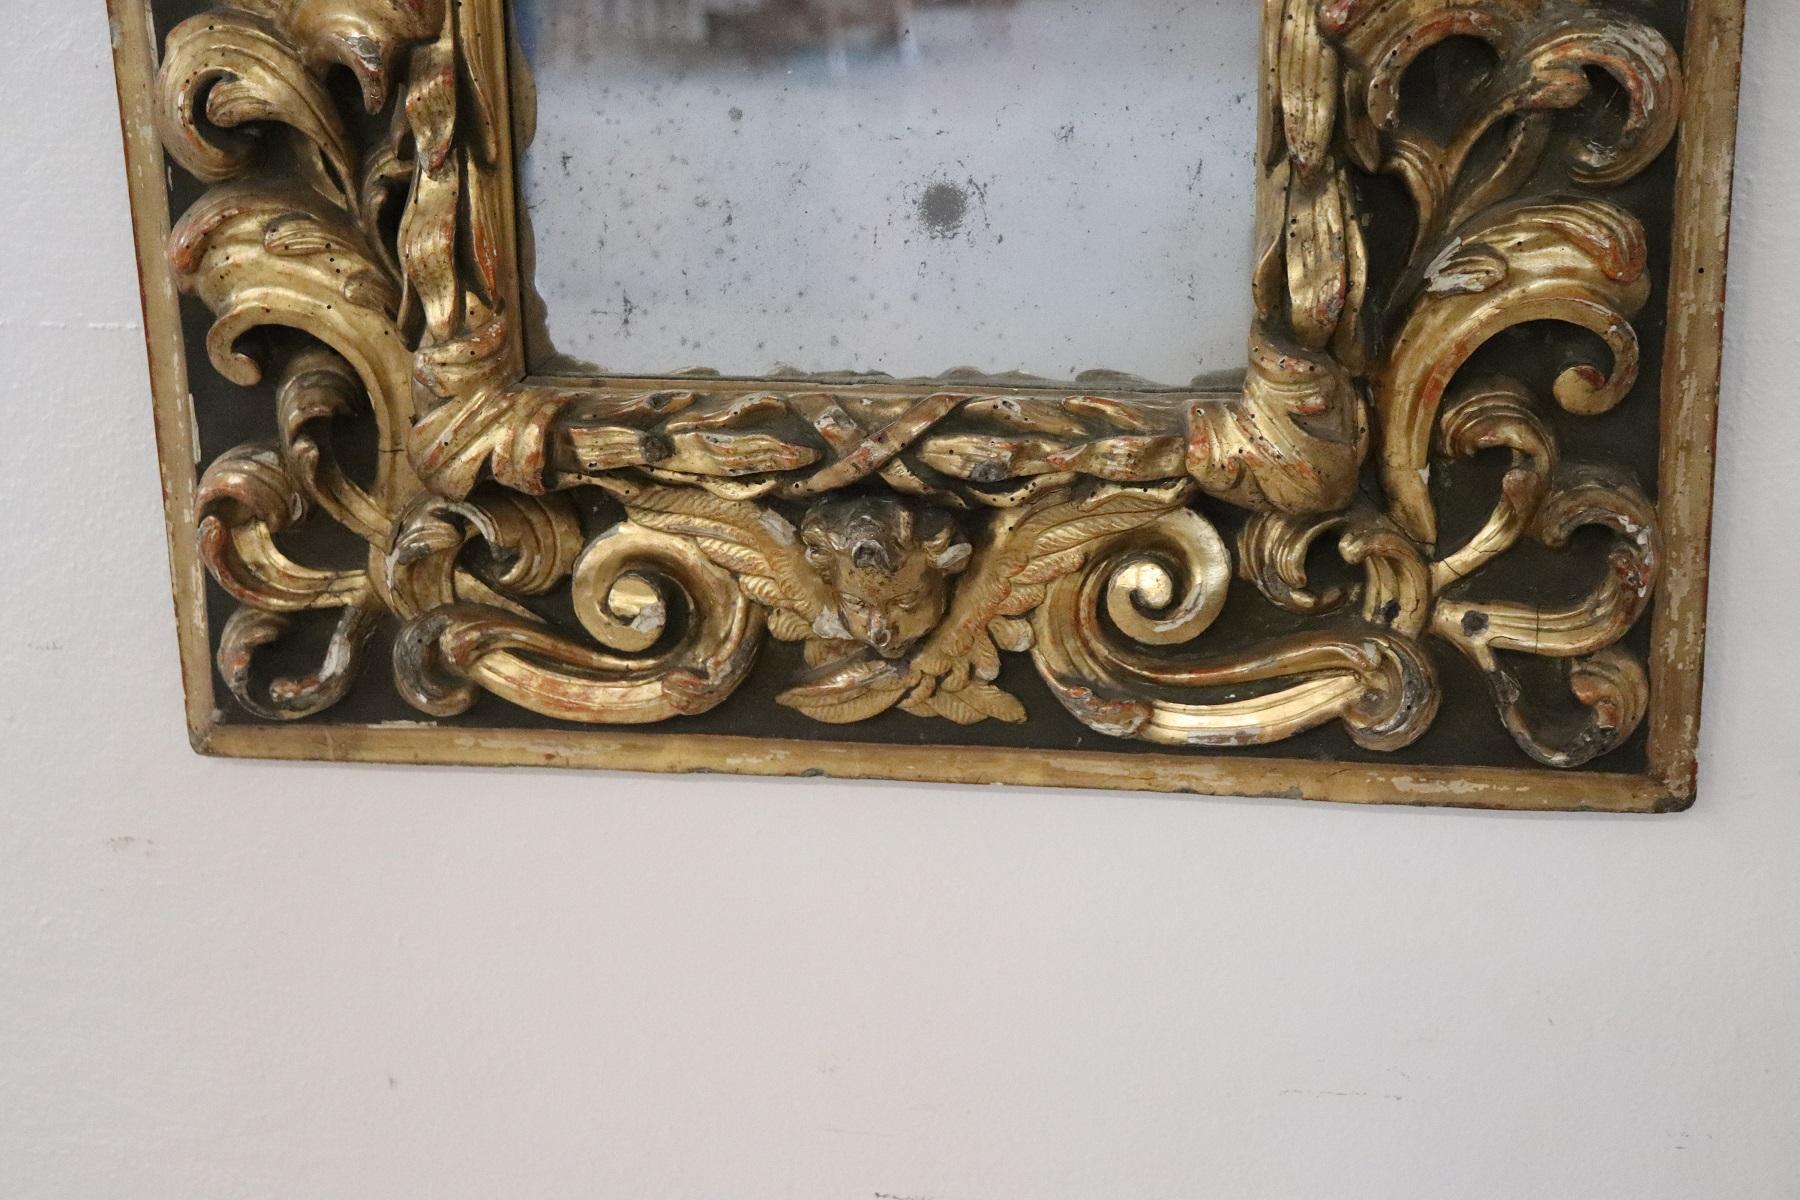 Important rare antique Louis XIV mirror authentic Baroque period. Great carving in wood decoration with acanthus leaves and little angels. Beautiful gilding made of gold leaf. The mirror condition used with its original mercury mirror.
Mirror of